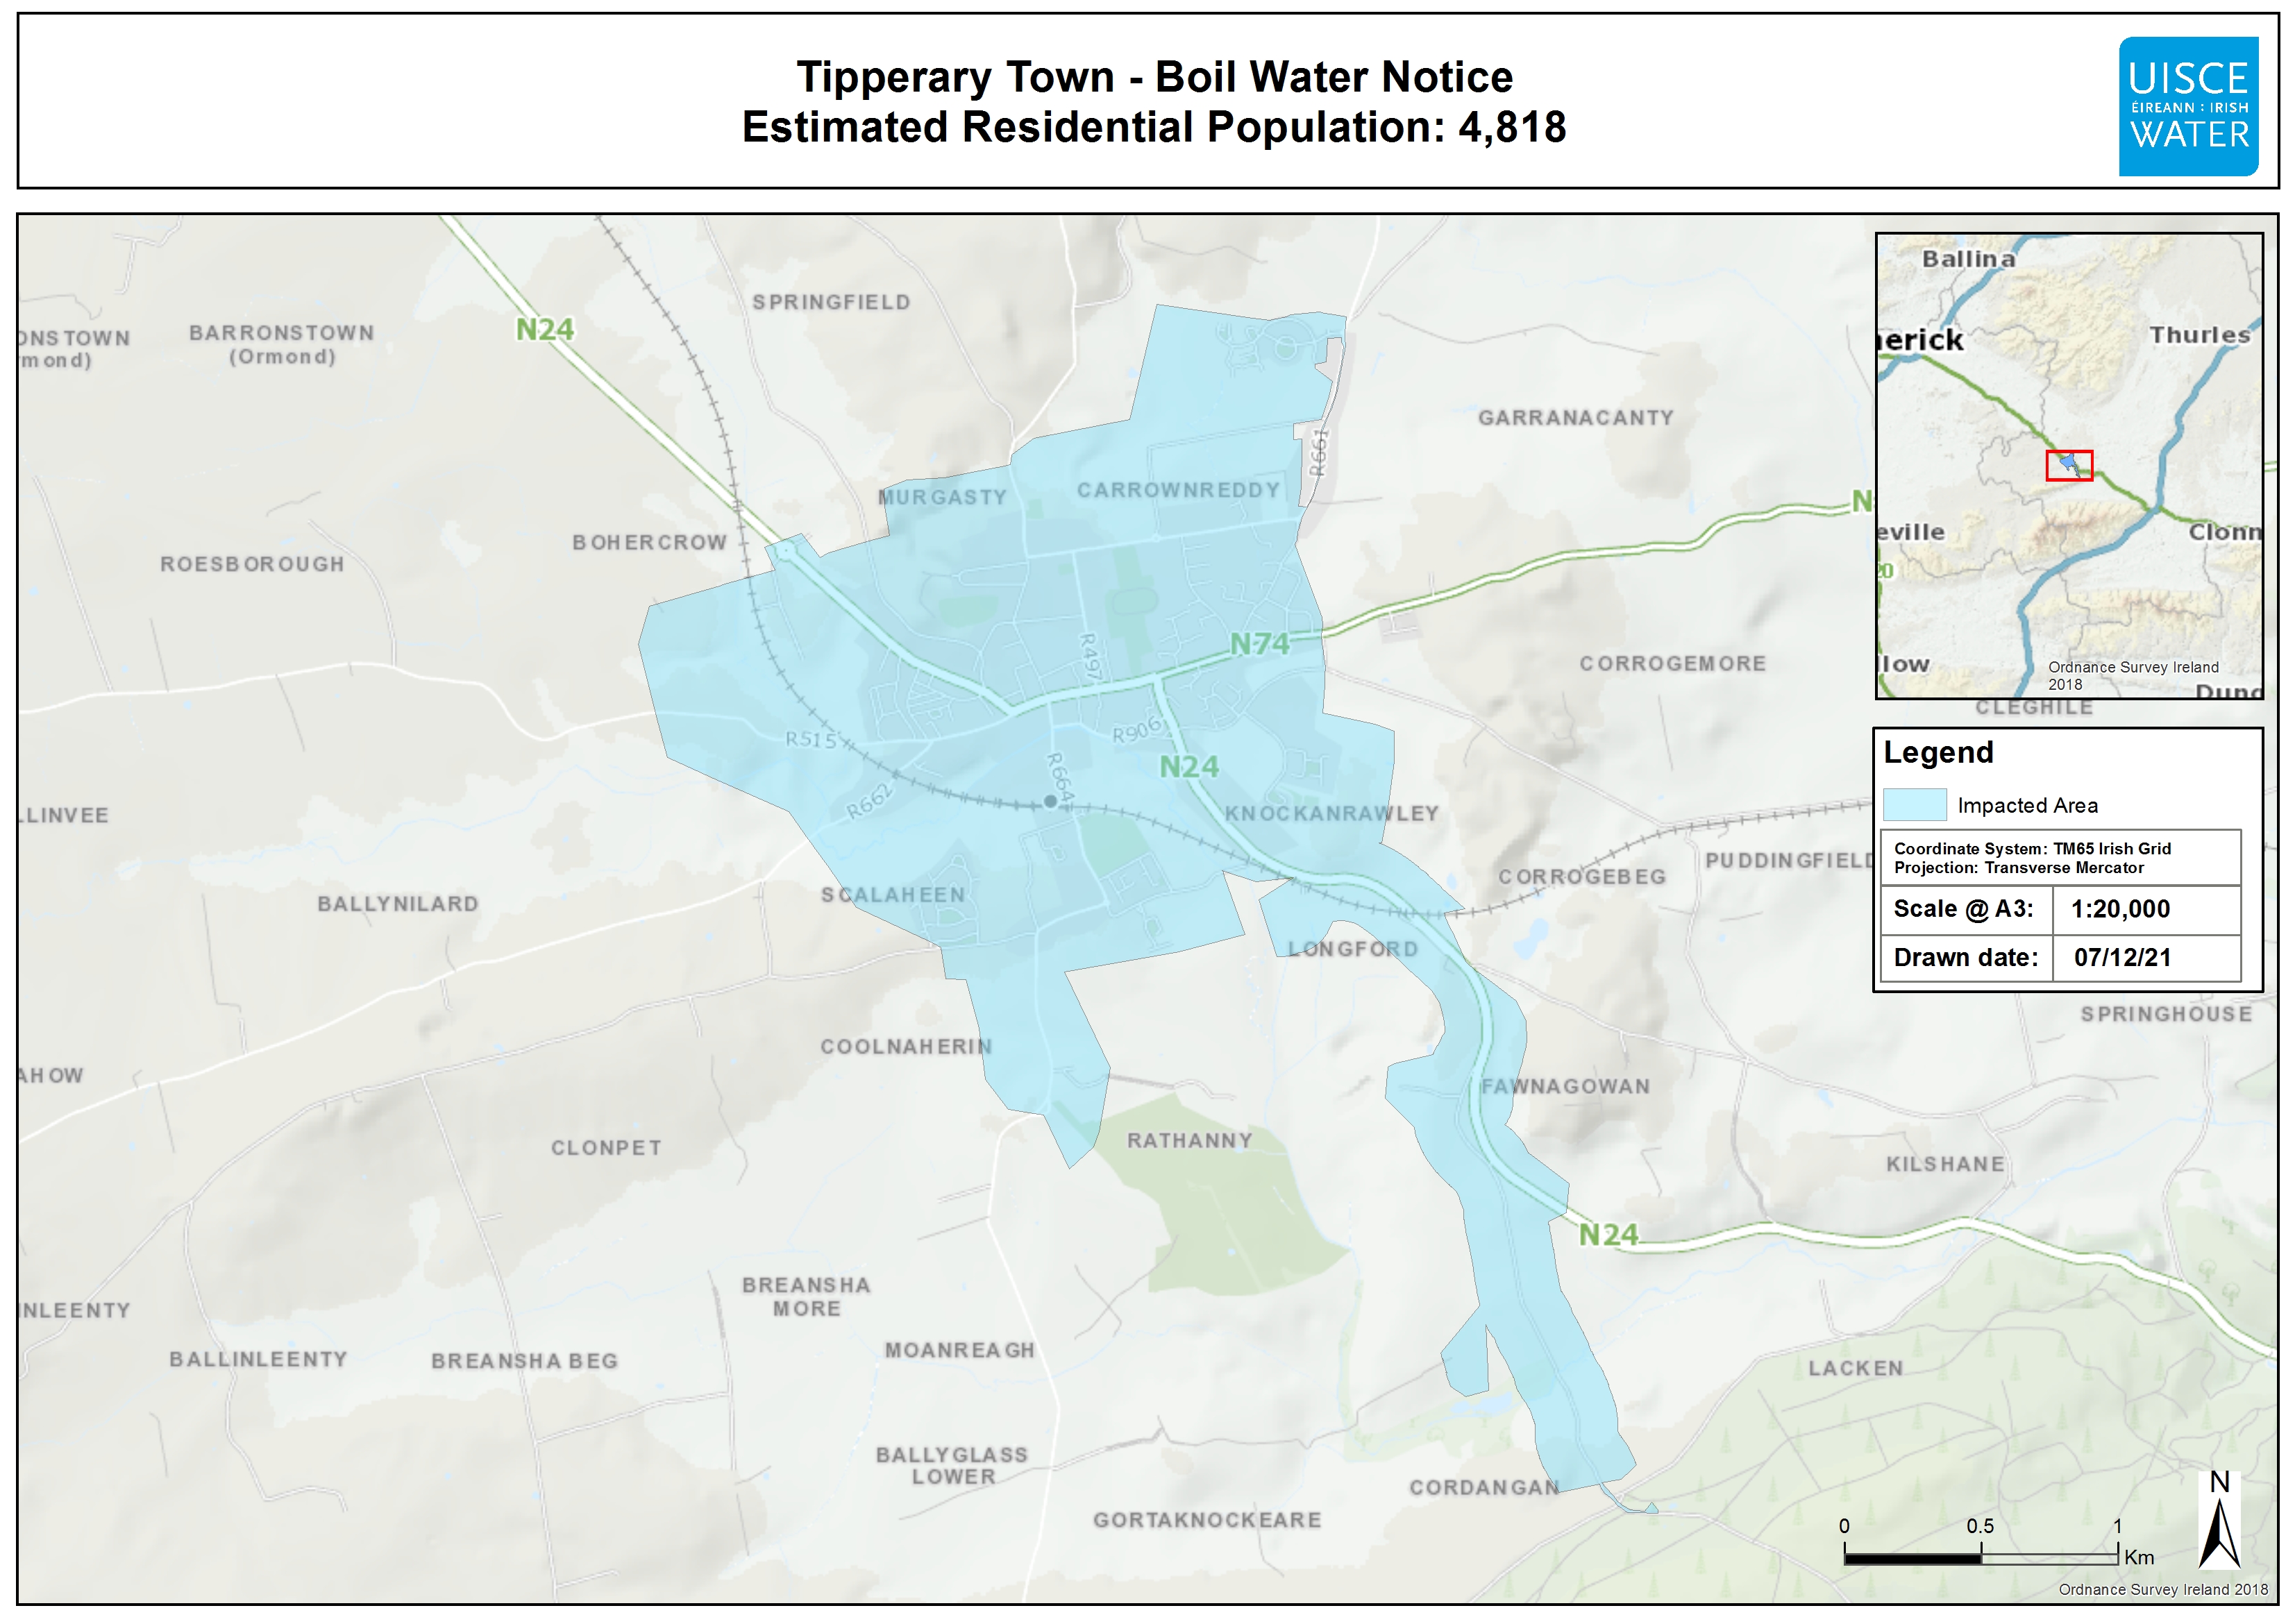 TIPPERARY TOWN BOIL WATER NOTICE